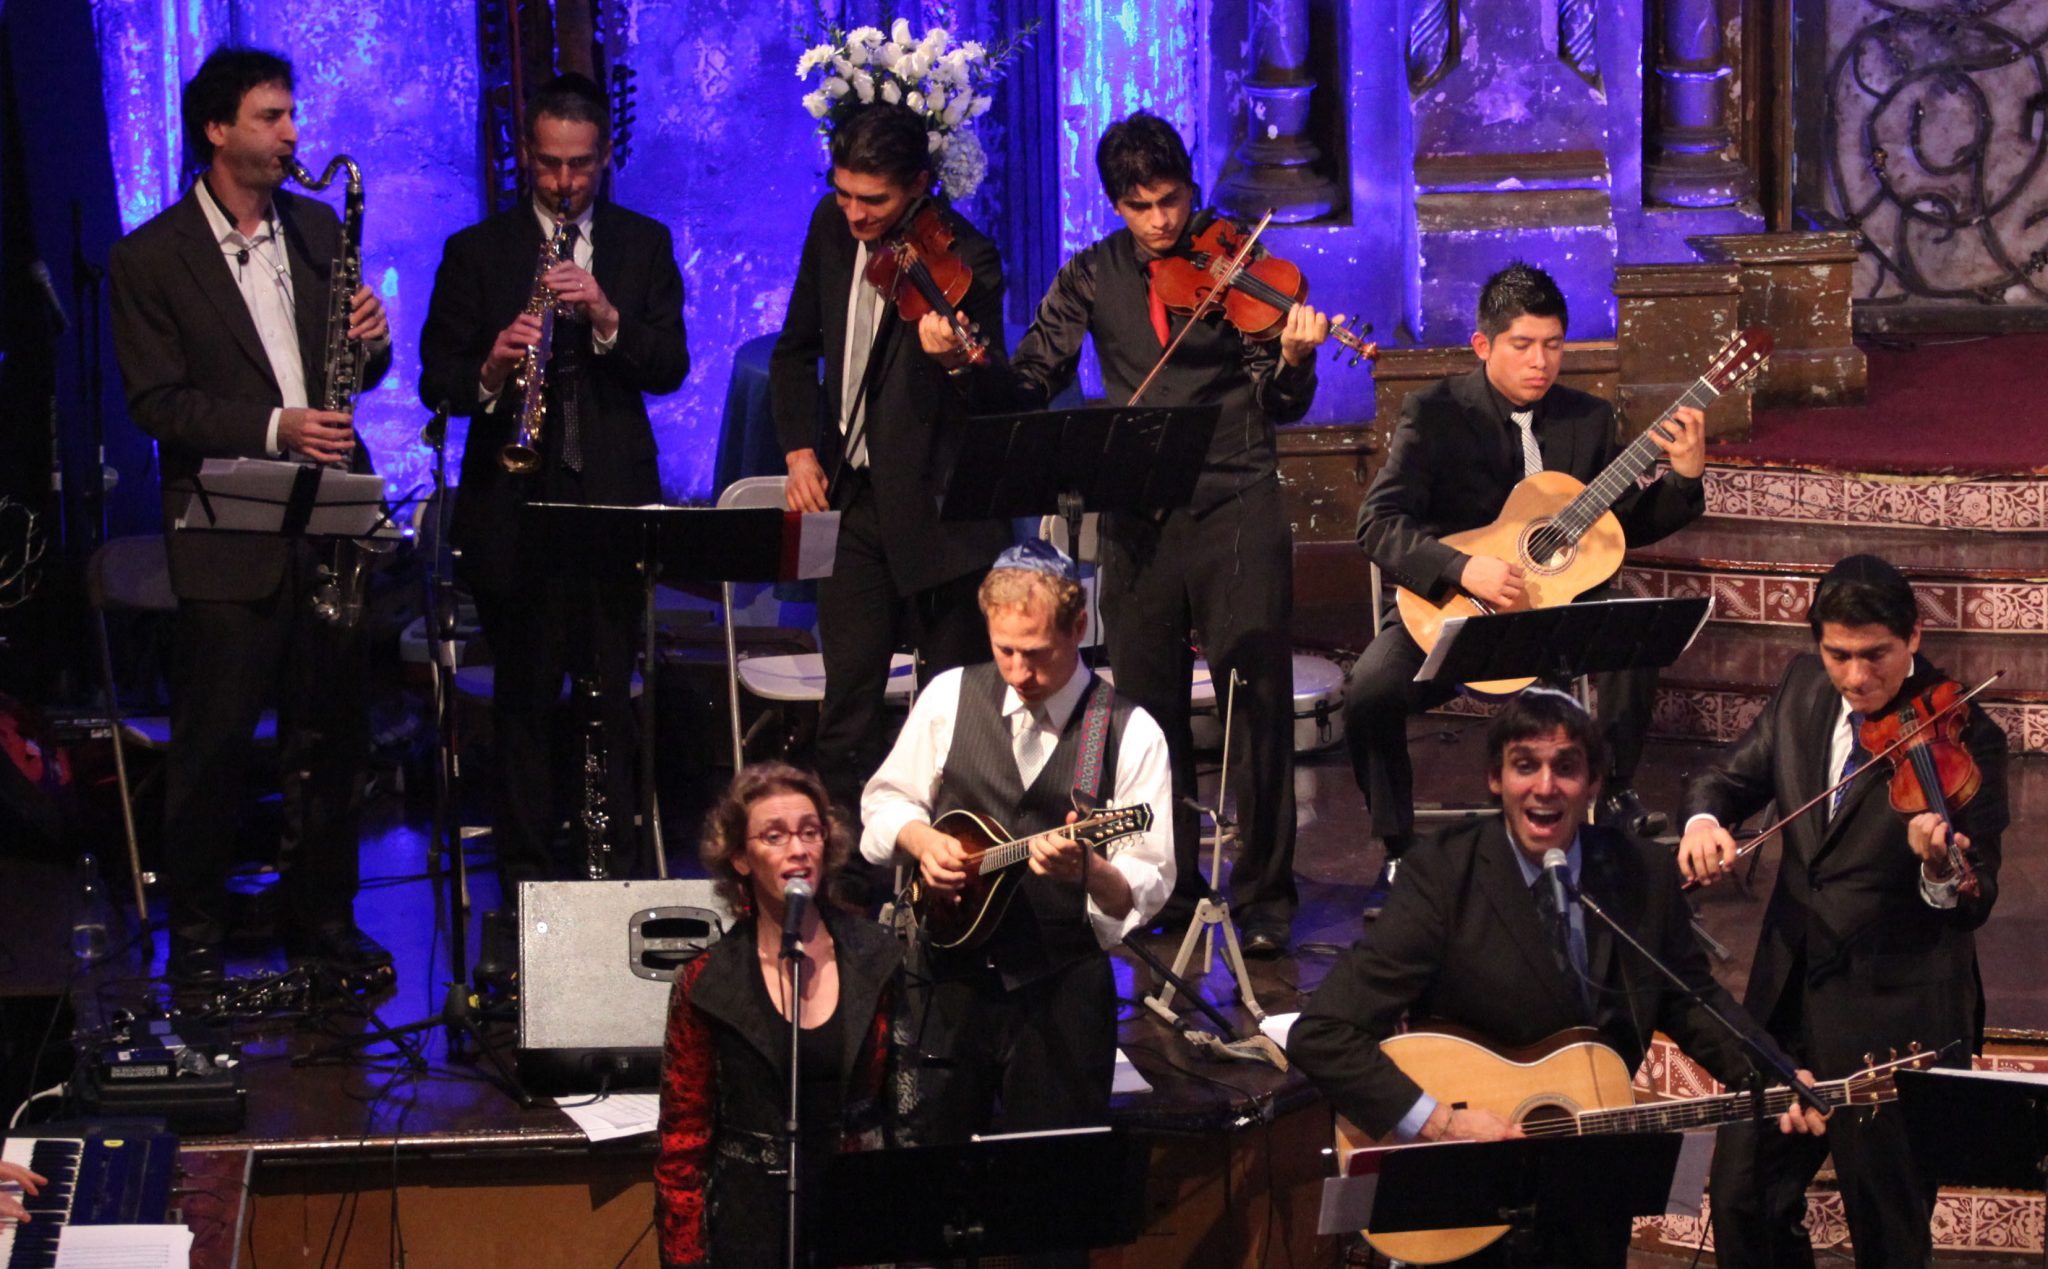 “Band Together In Love Concert” at the Angel Orensanz Foundation